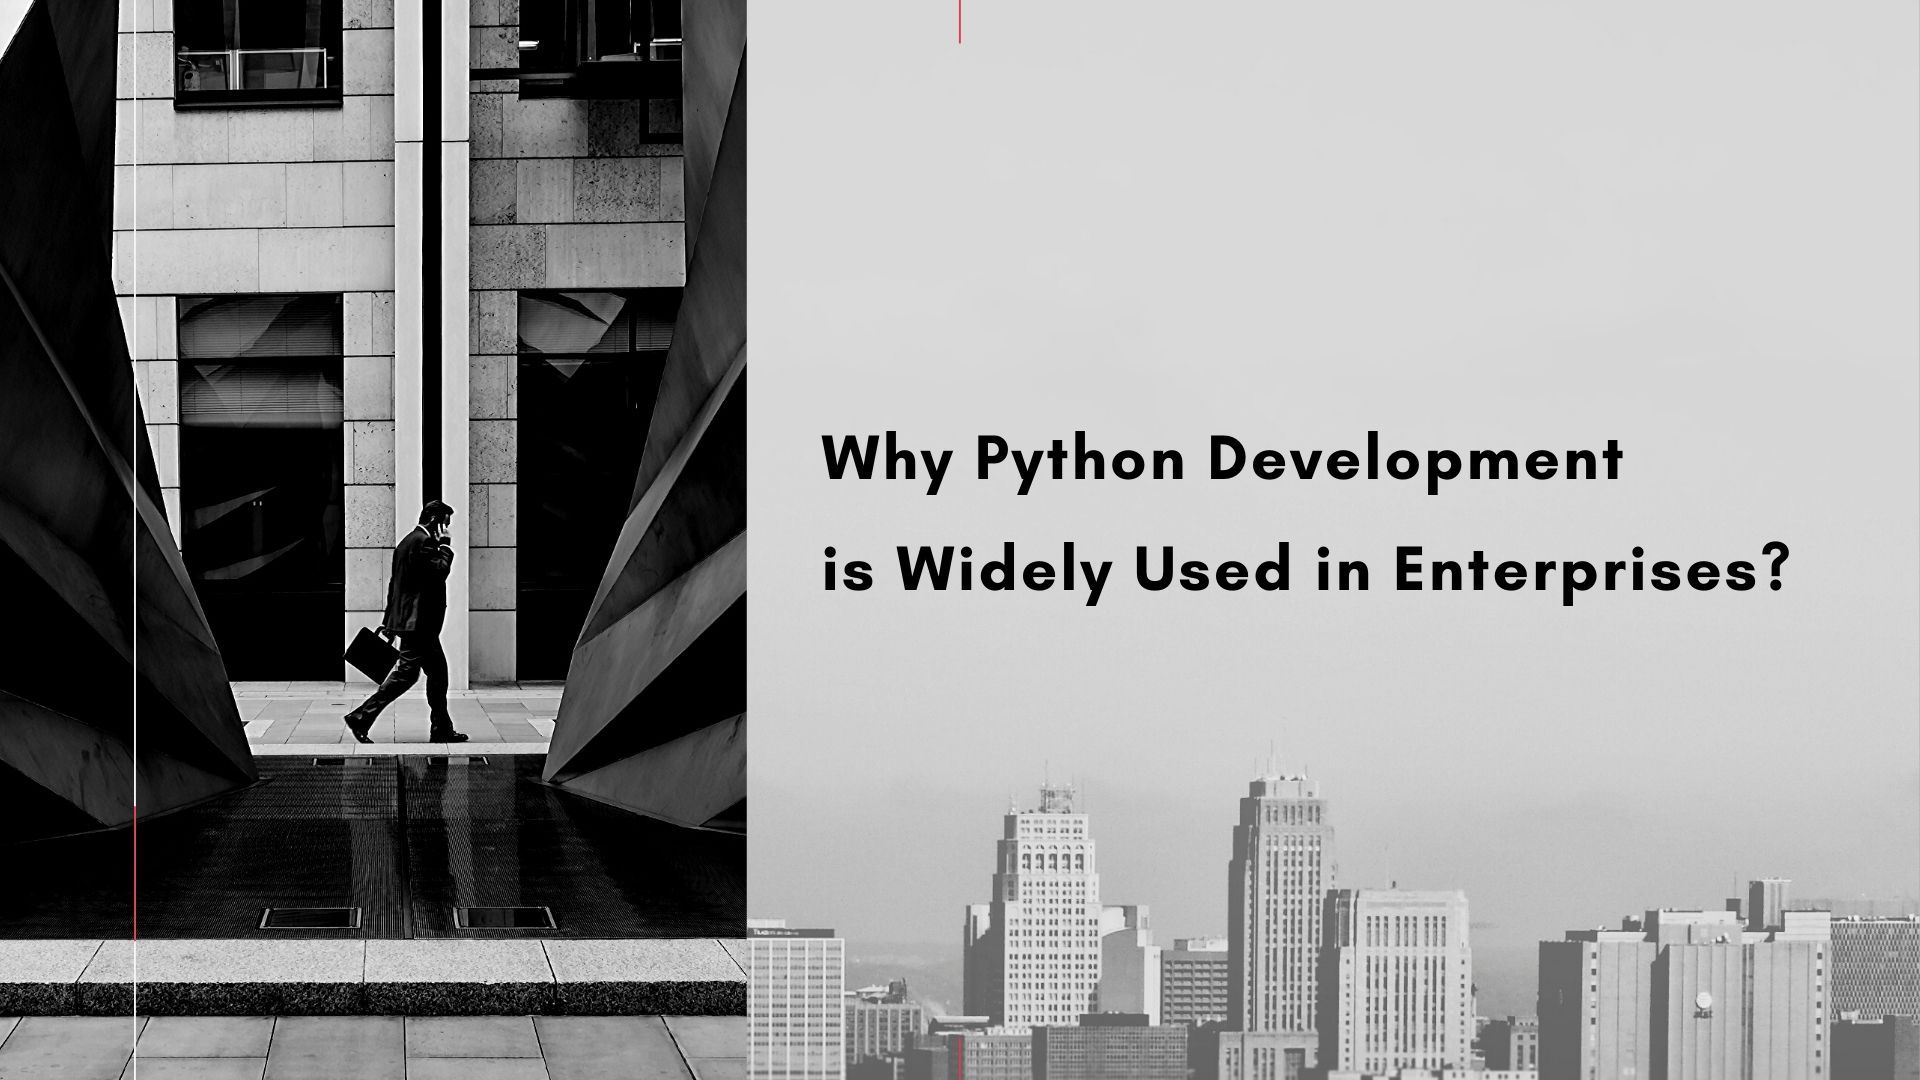 Top Reasons Why Python Development is Widely Used in Enterprises